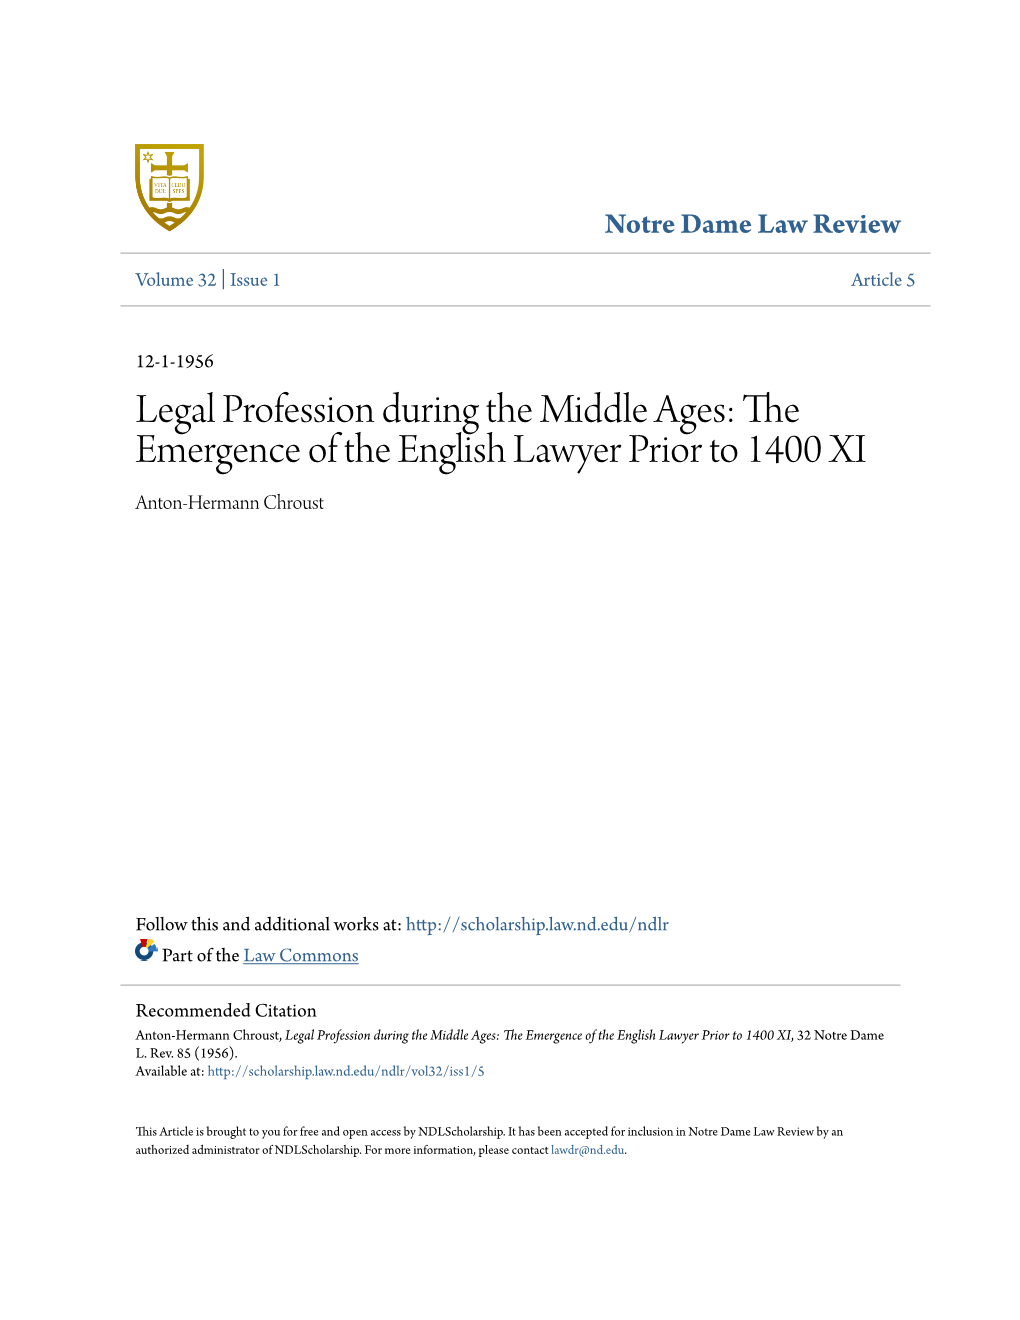 Legal Profession During the Middle Ages: the Emergence of the English Lawyer Prior to 1400 XI Anton-Hermann Chroust